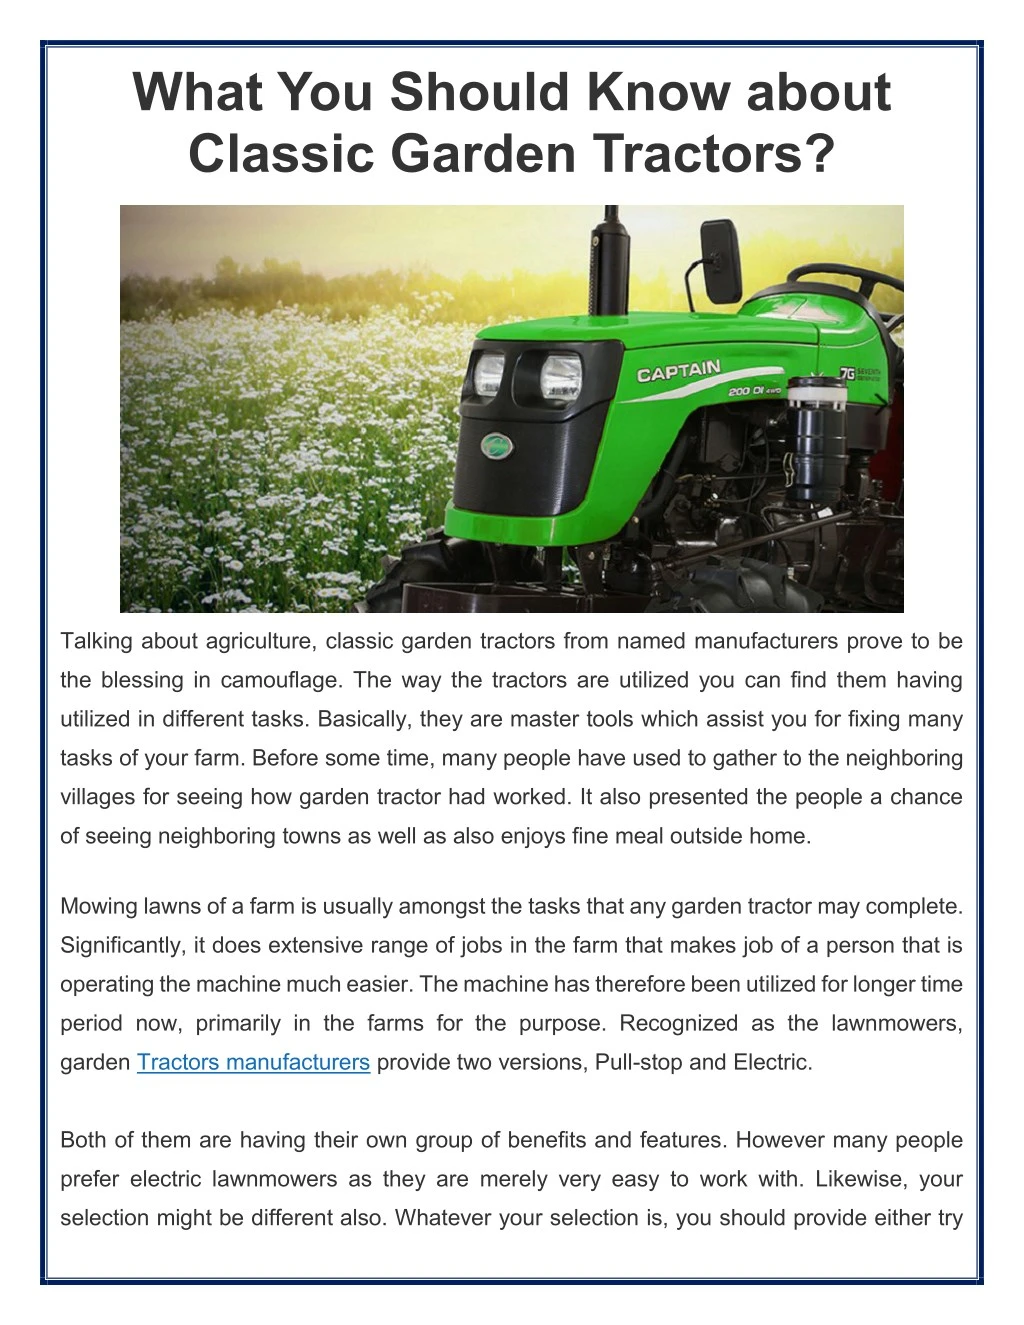 what you should know about classic garden tractors